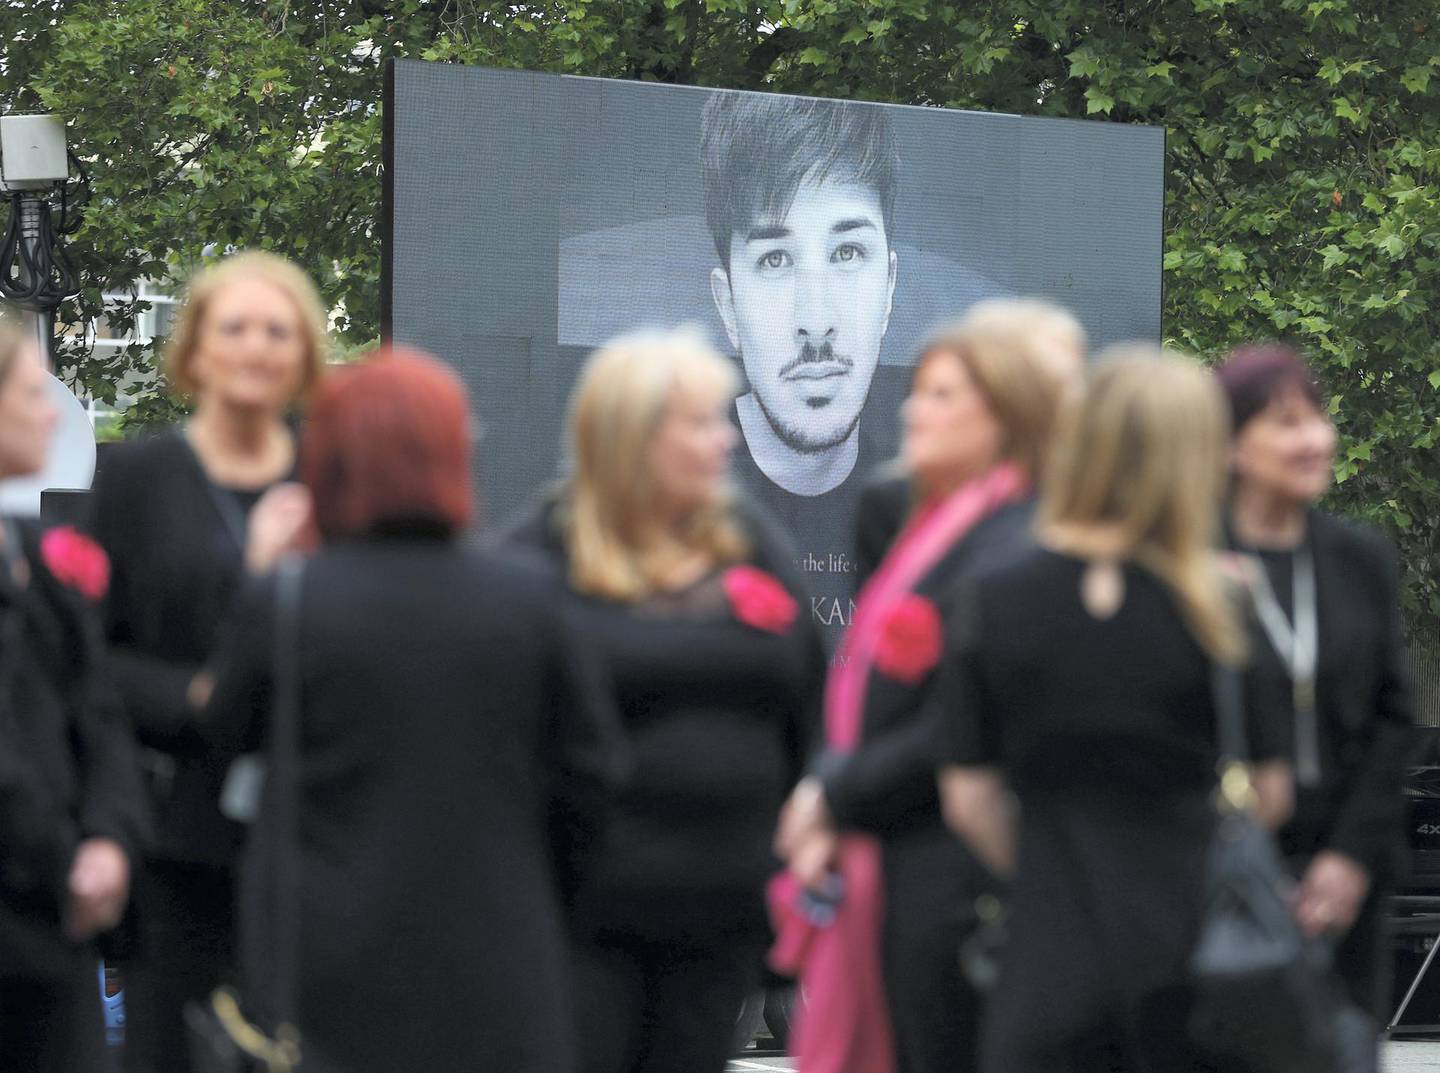 STOCKPORT, ENGLAND - JUNE 30: A screen displaying an image of Martyn Hett outside Stockport Town Hall as mourners arrive for his funeral on June 30, 2017 in Stockport, England.  29 year old Martyn Hett was one of 22 people who died in the suicide bombing at Manchester Arena after attending an Ariana Grande concert. Scottish singer Michelle McManus will perform at the service which will be screened outside for anyone who cannot fit inside the venue. (Photo by Dave Thompson/Getty Images)